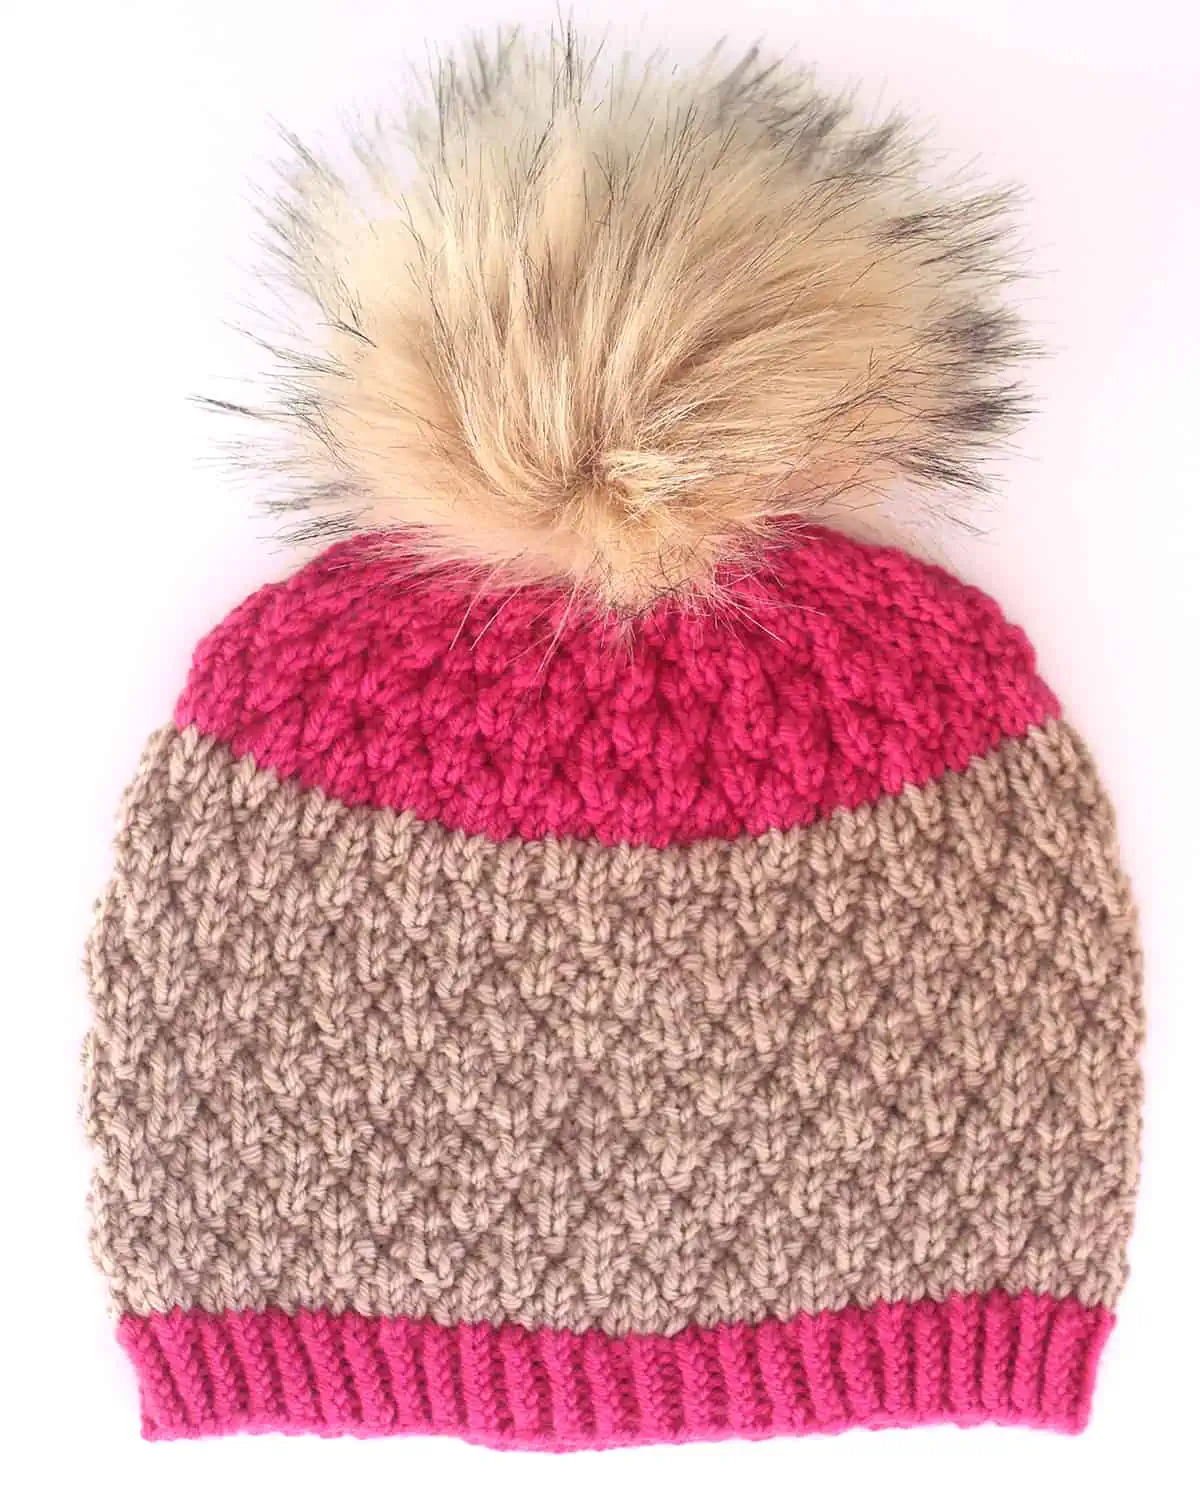 Seersucker knitted hat in tan and pink colored yarns with faux fur pom pom.